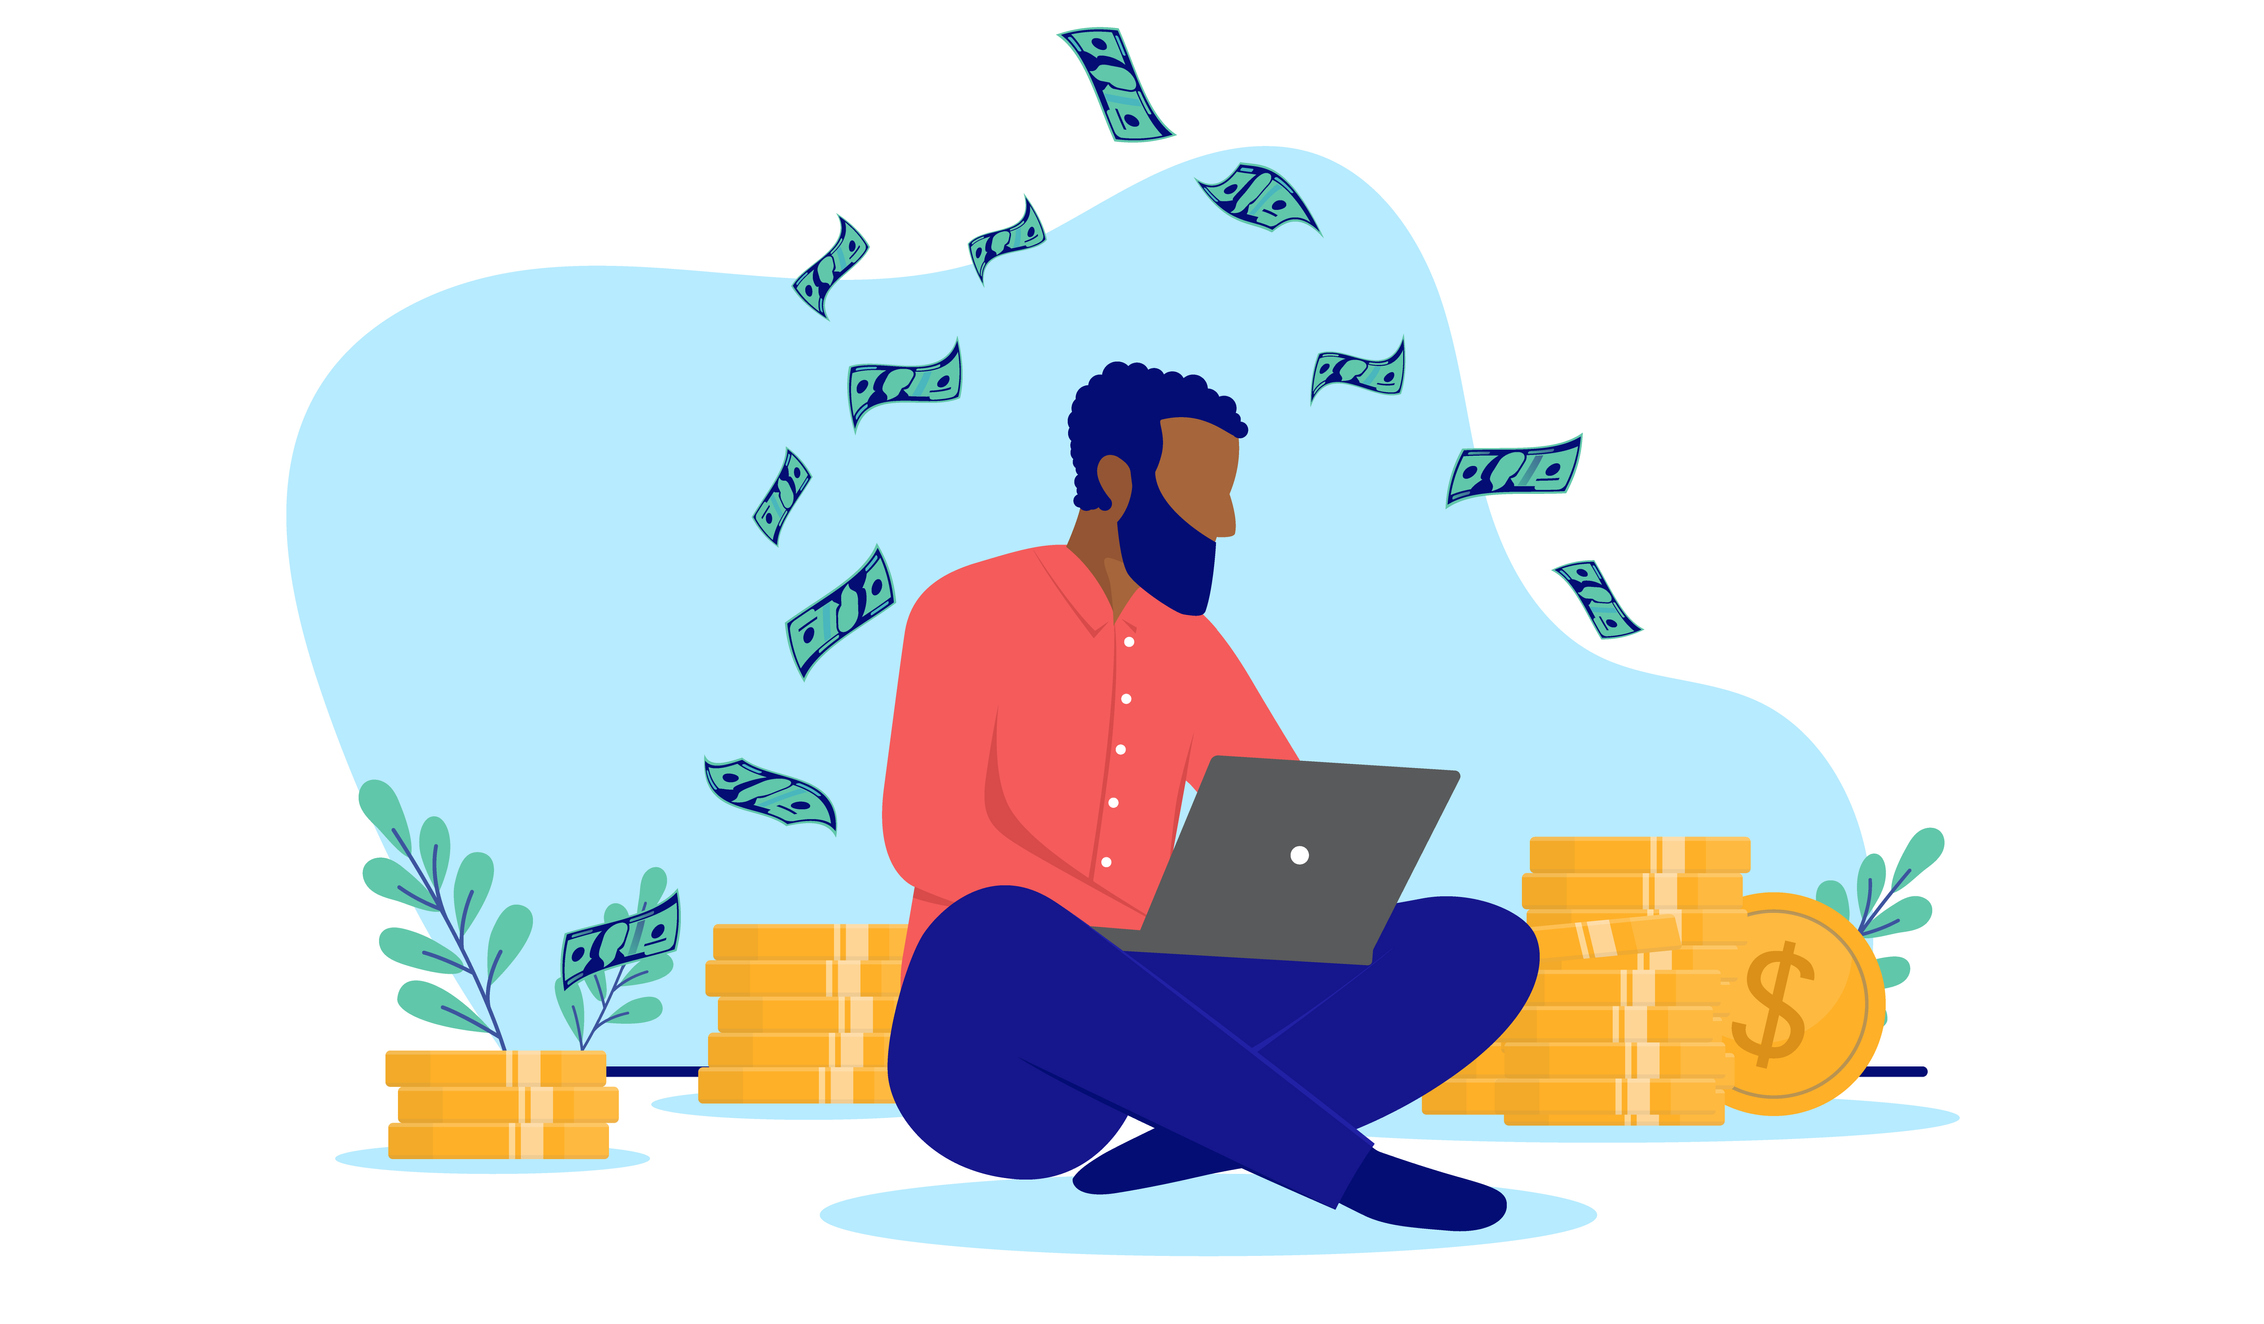 Black ethnic man sitting on the floor with laptop and earning income online. Flat design vector illustration with white background